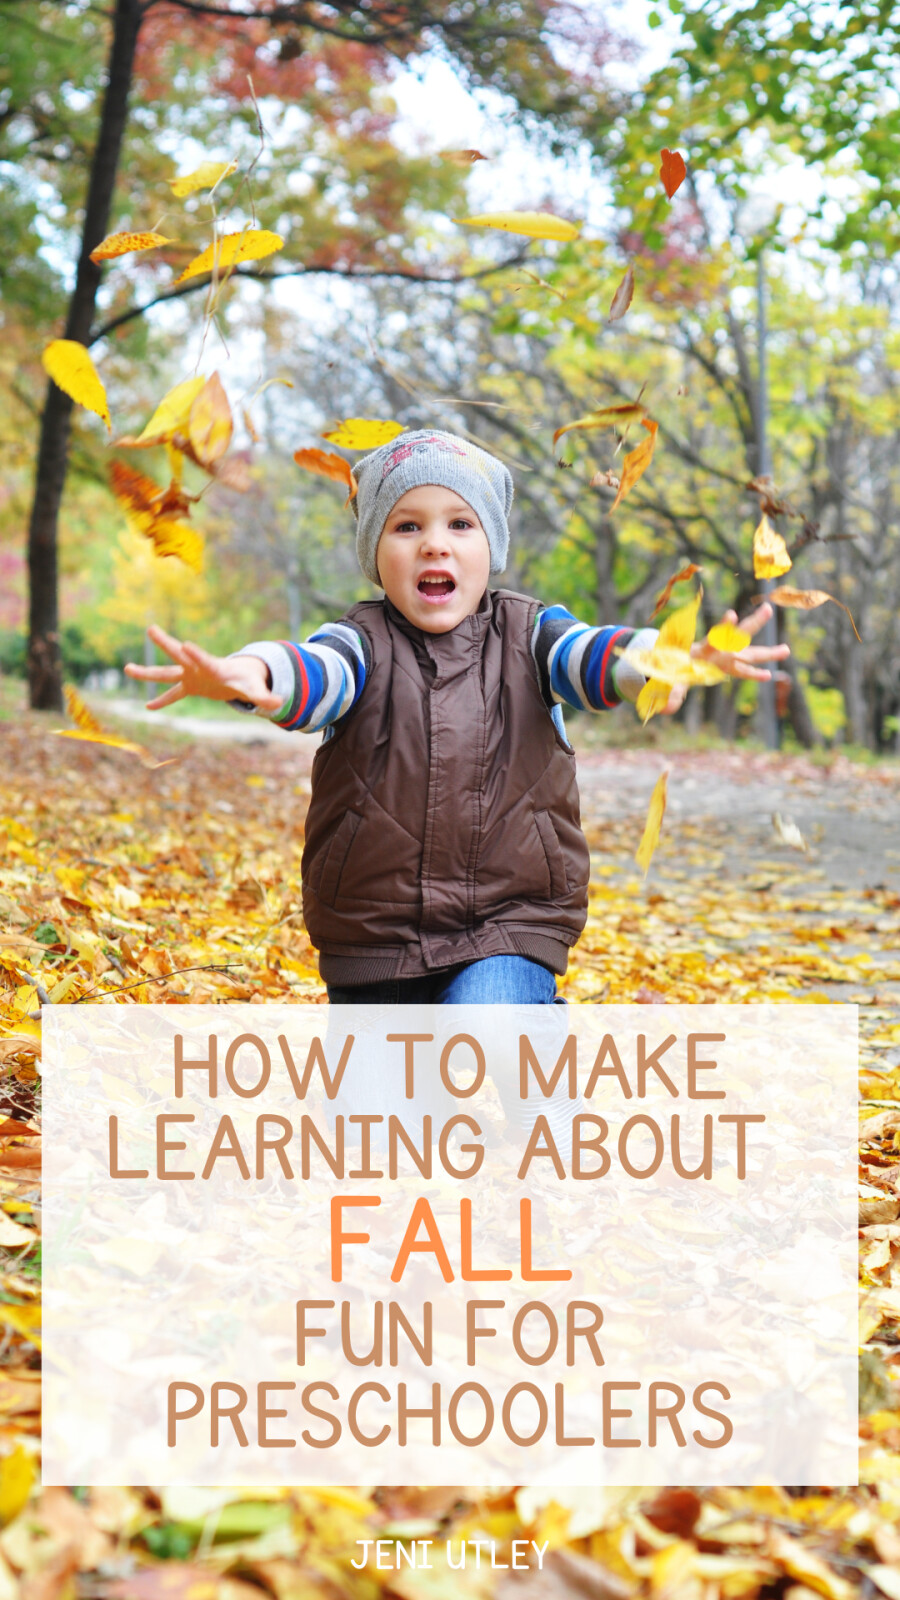 HOW TO MAKE LEARNING ABOUT FALL FUN FOR PRESCHOOLERS